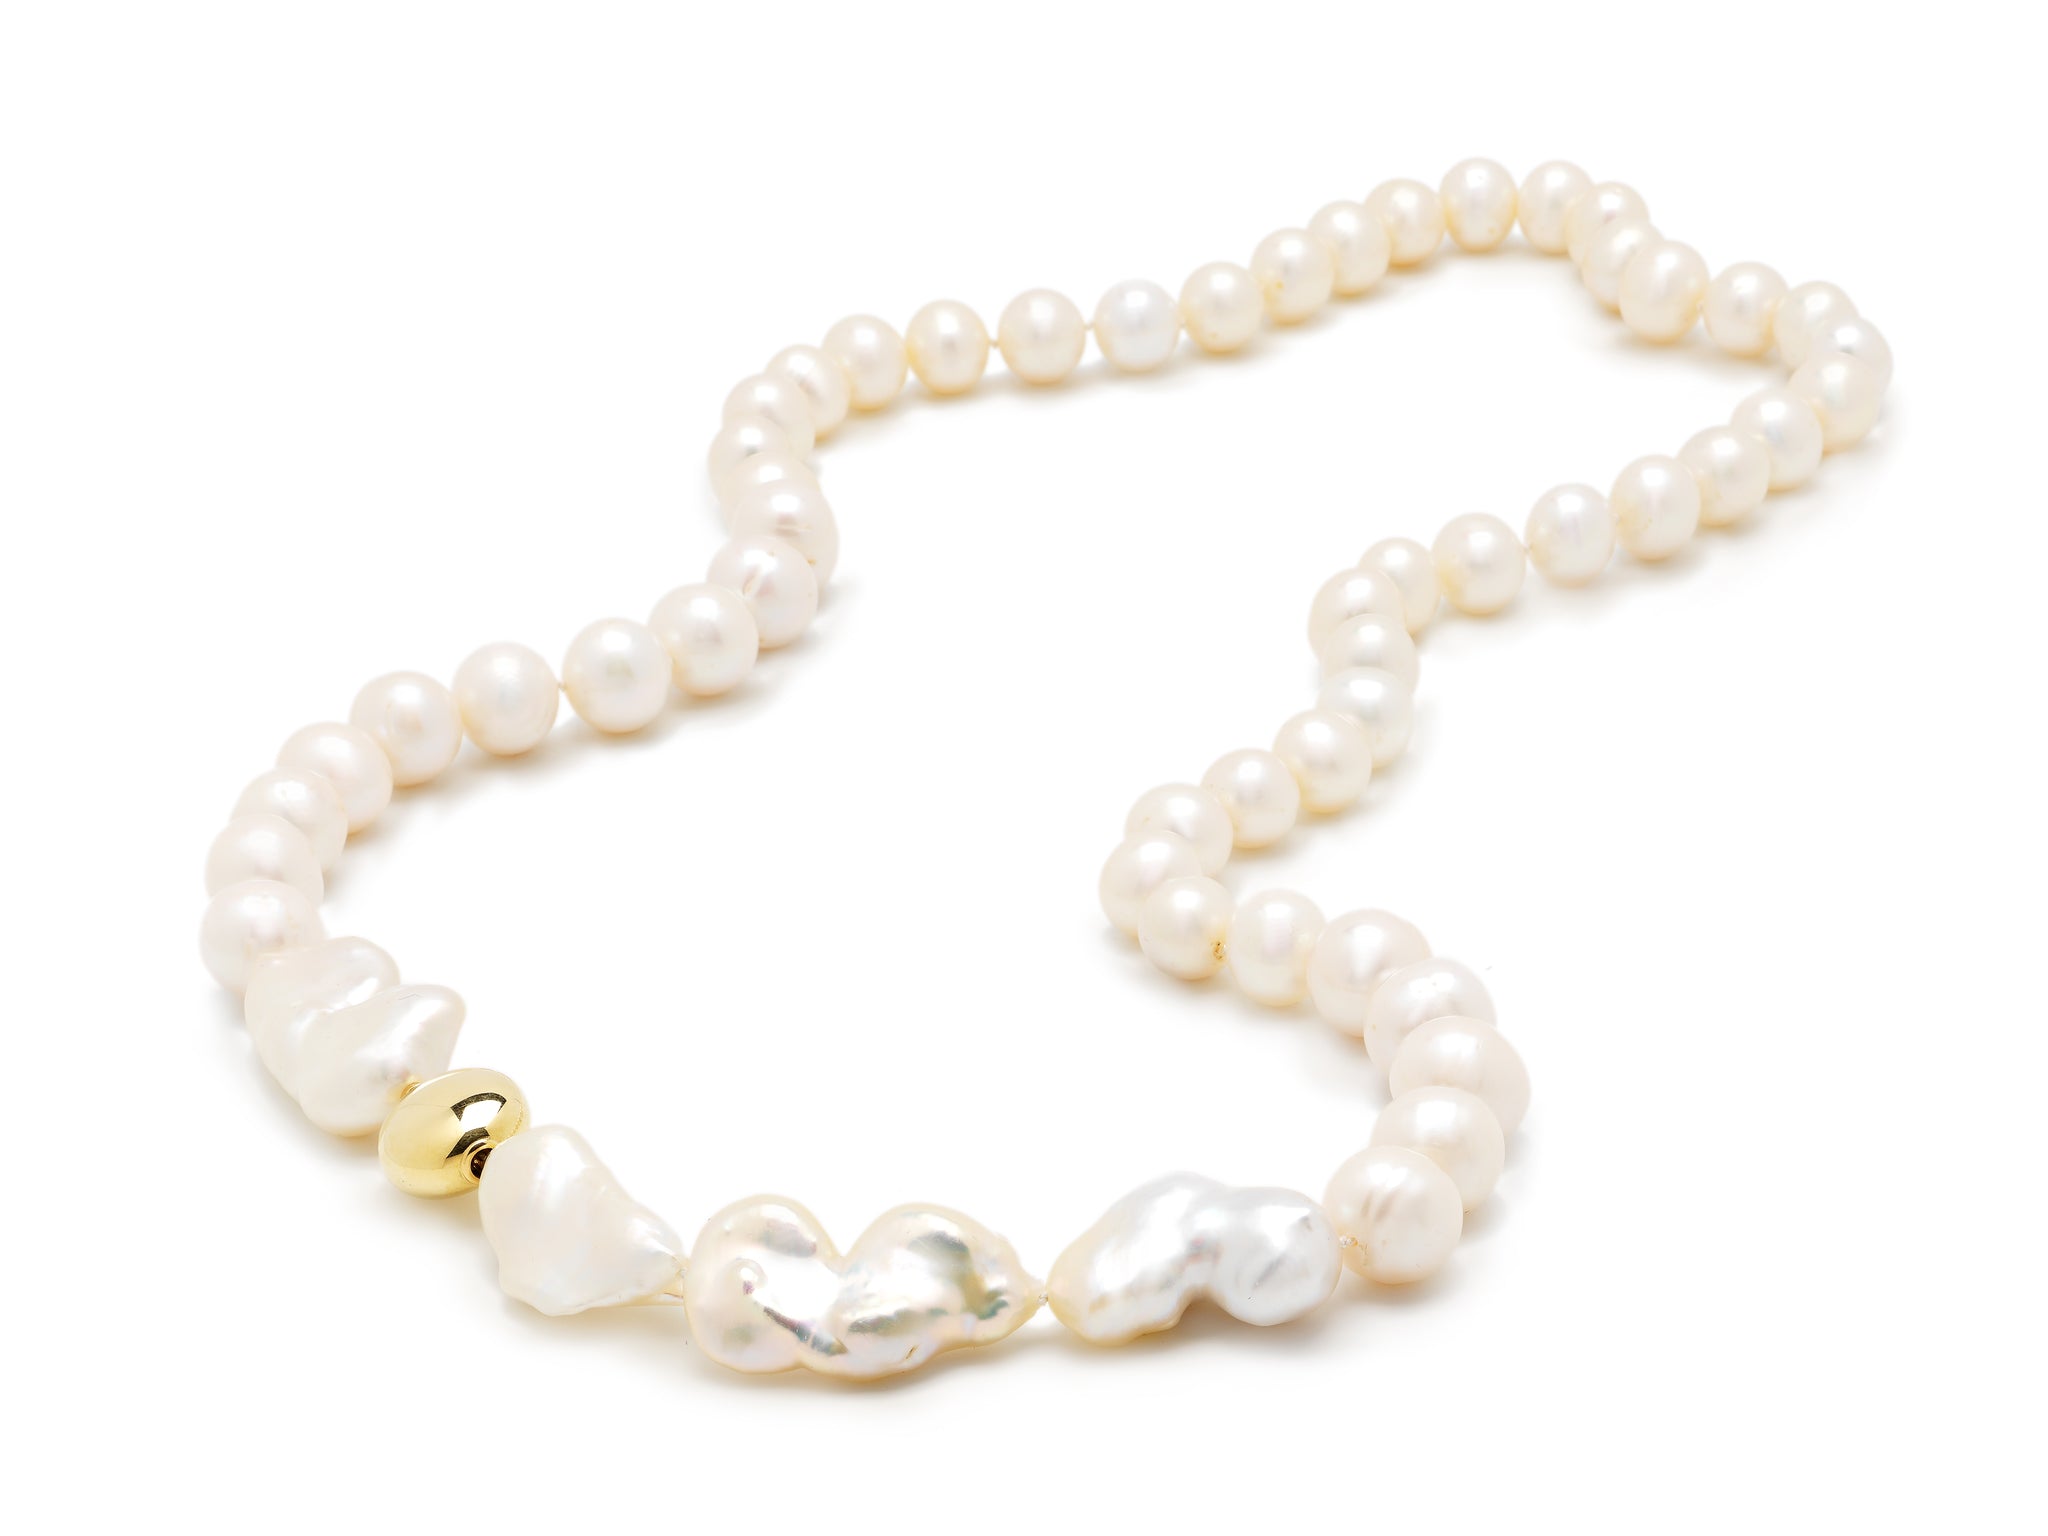 Necklace of 4 baroque pearls and 51 round pearls with 18krt yellow gold lock